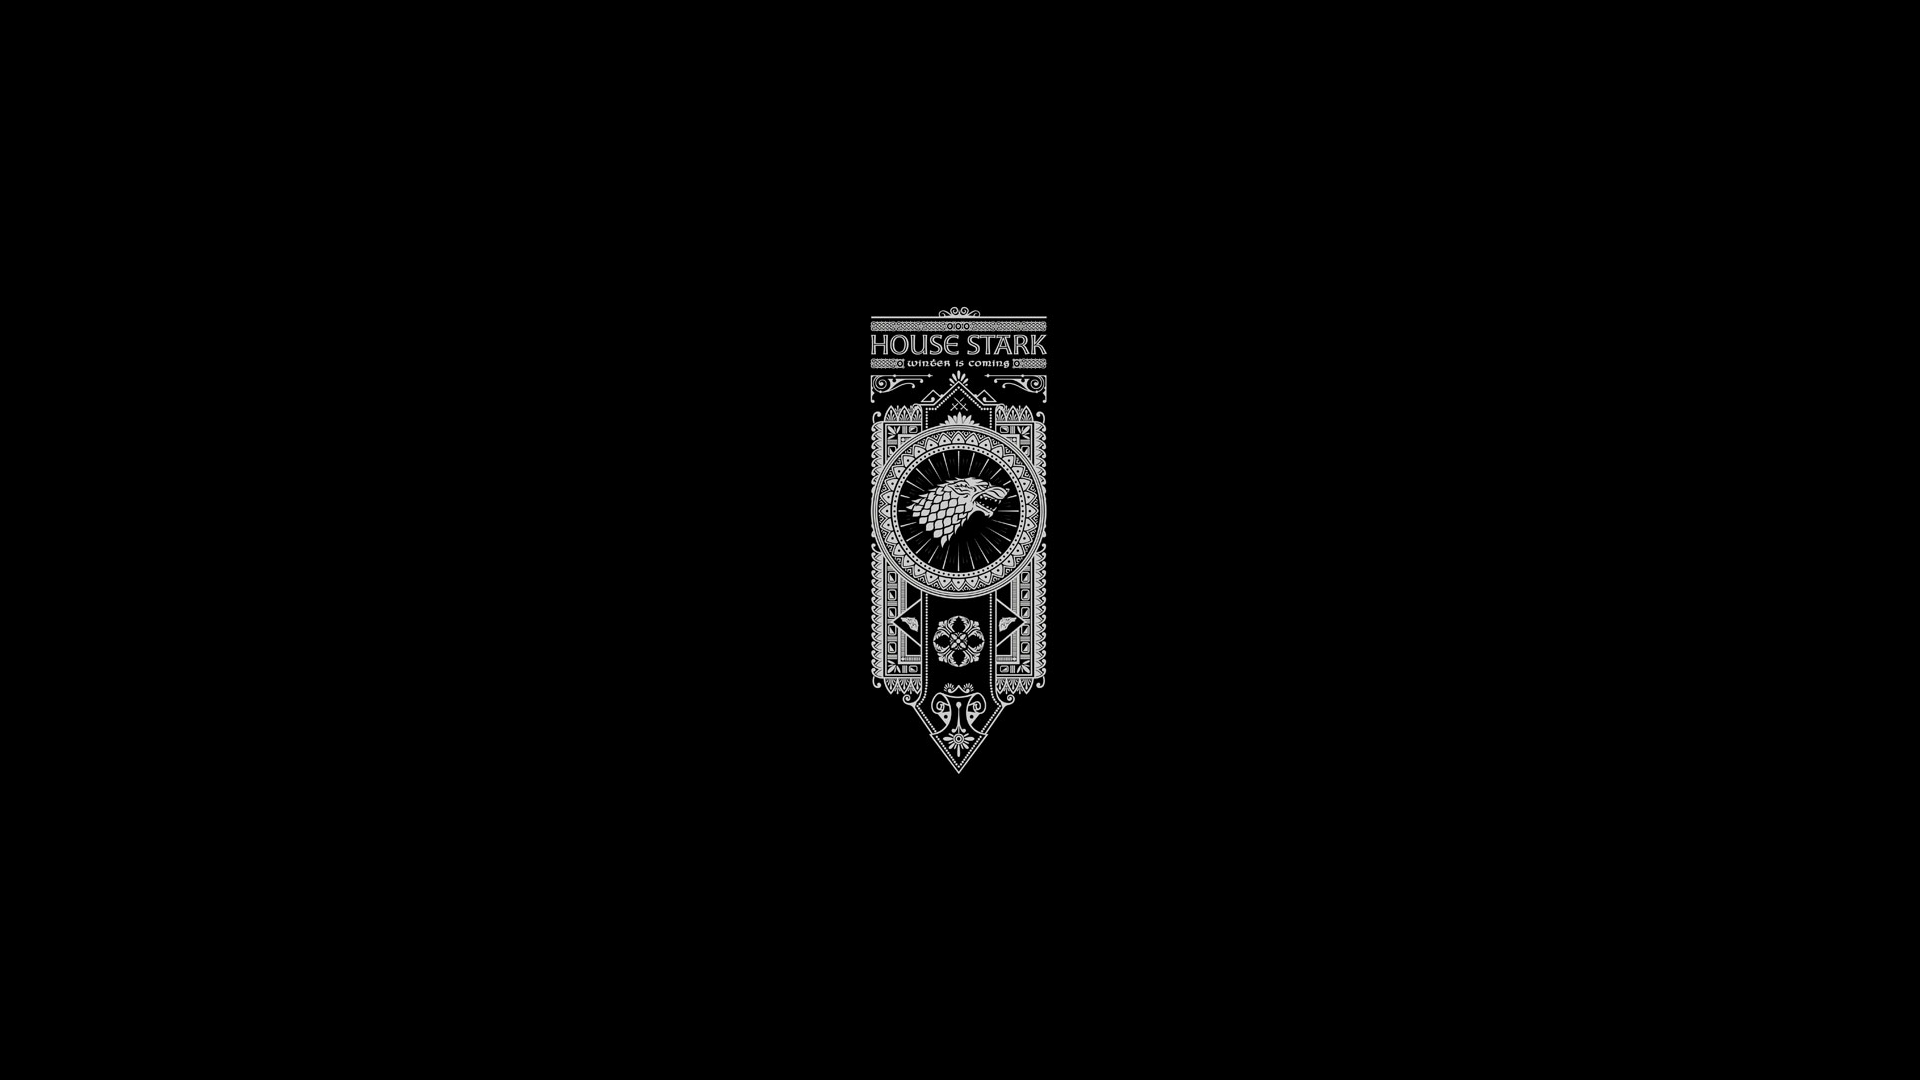 Game of Thrones Song of Ice and Fire Stark Minimal Black wallpaperx1080